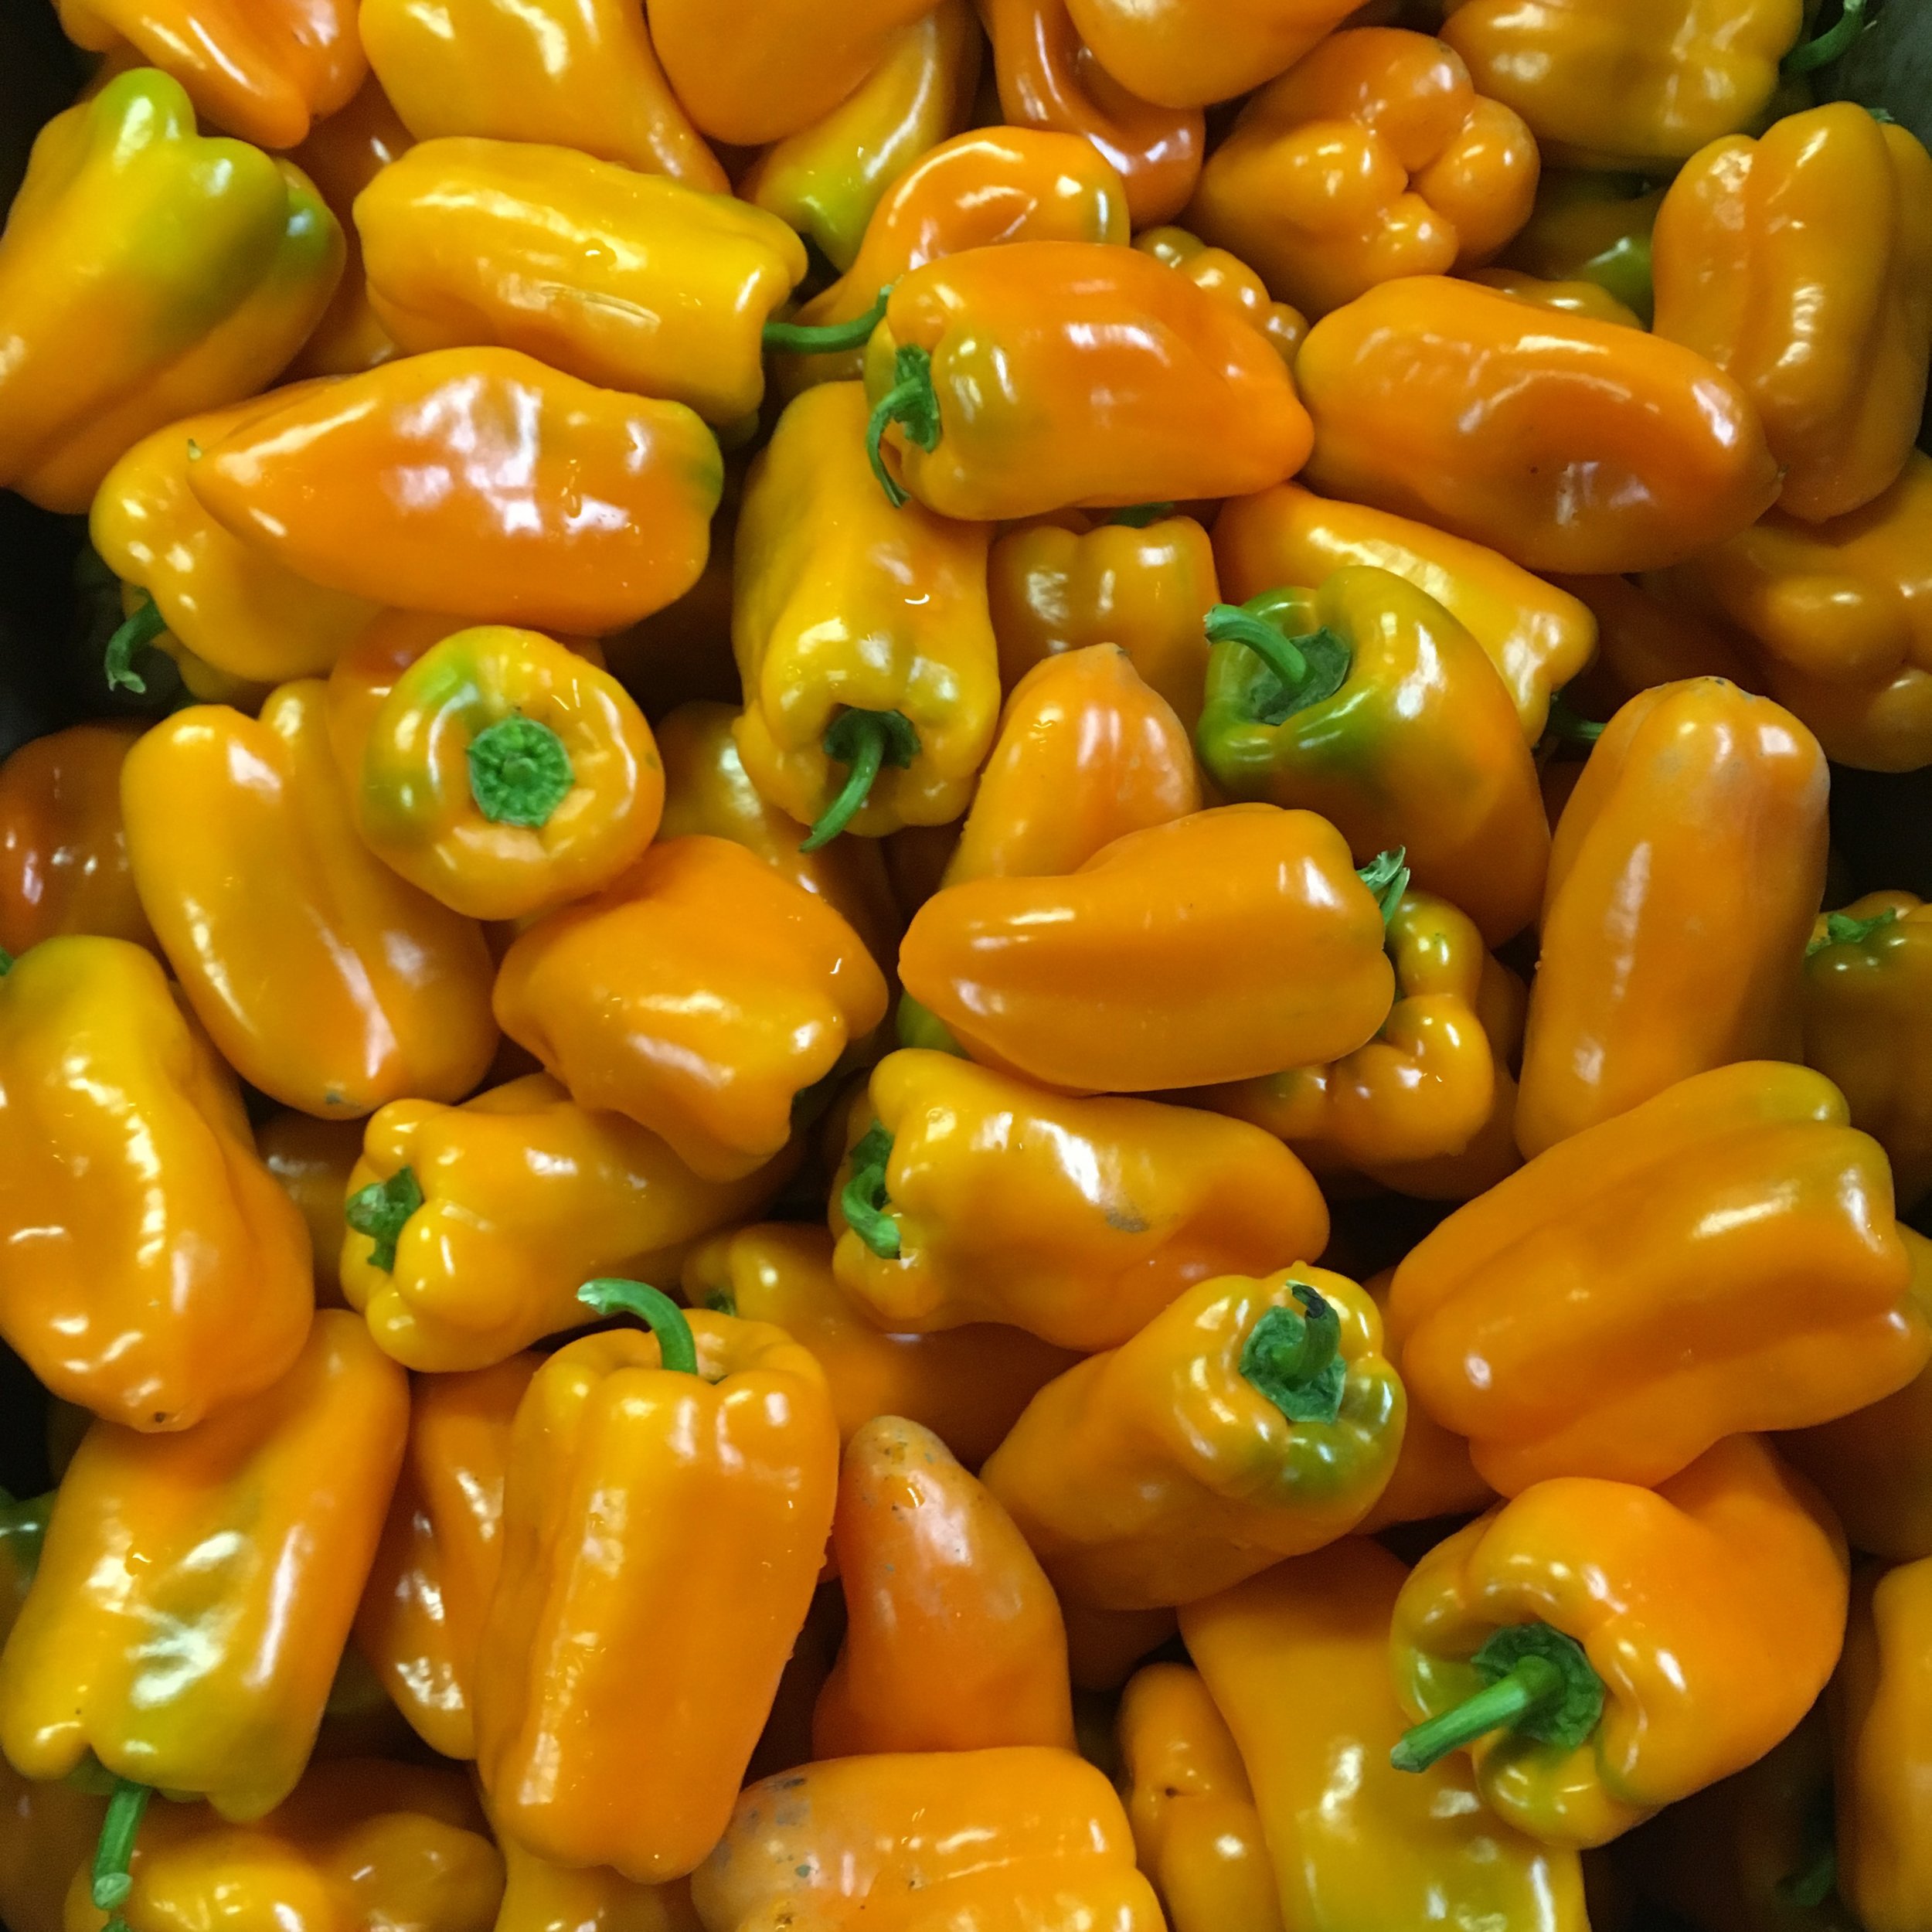 helsing junction farms csa yellow bell peppers